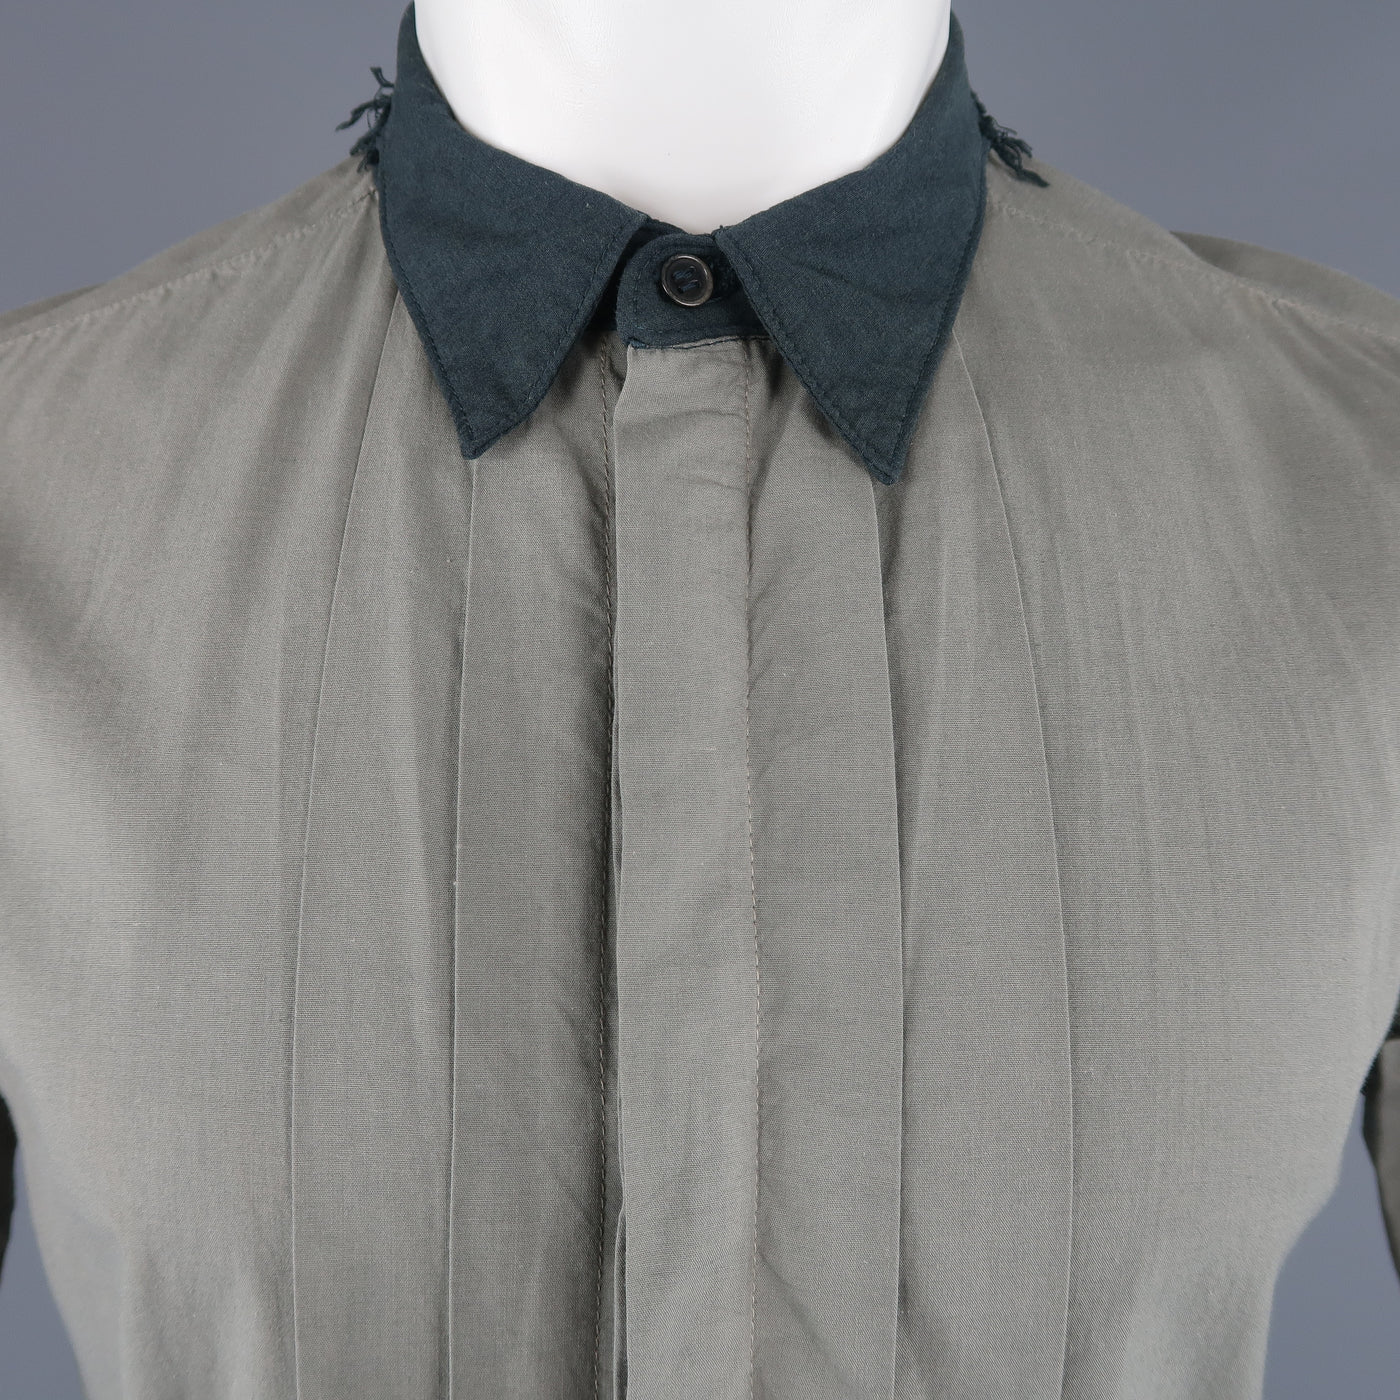 NICE COLLECTIVE Size M Grey Cotton Pleated Contrast Collar Short Sleeve Shirt